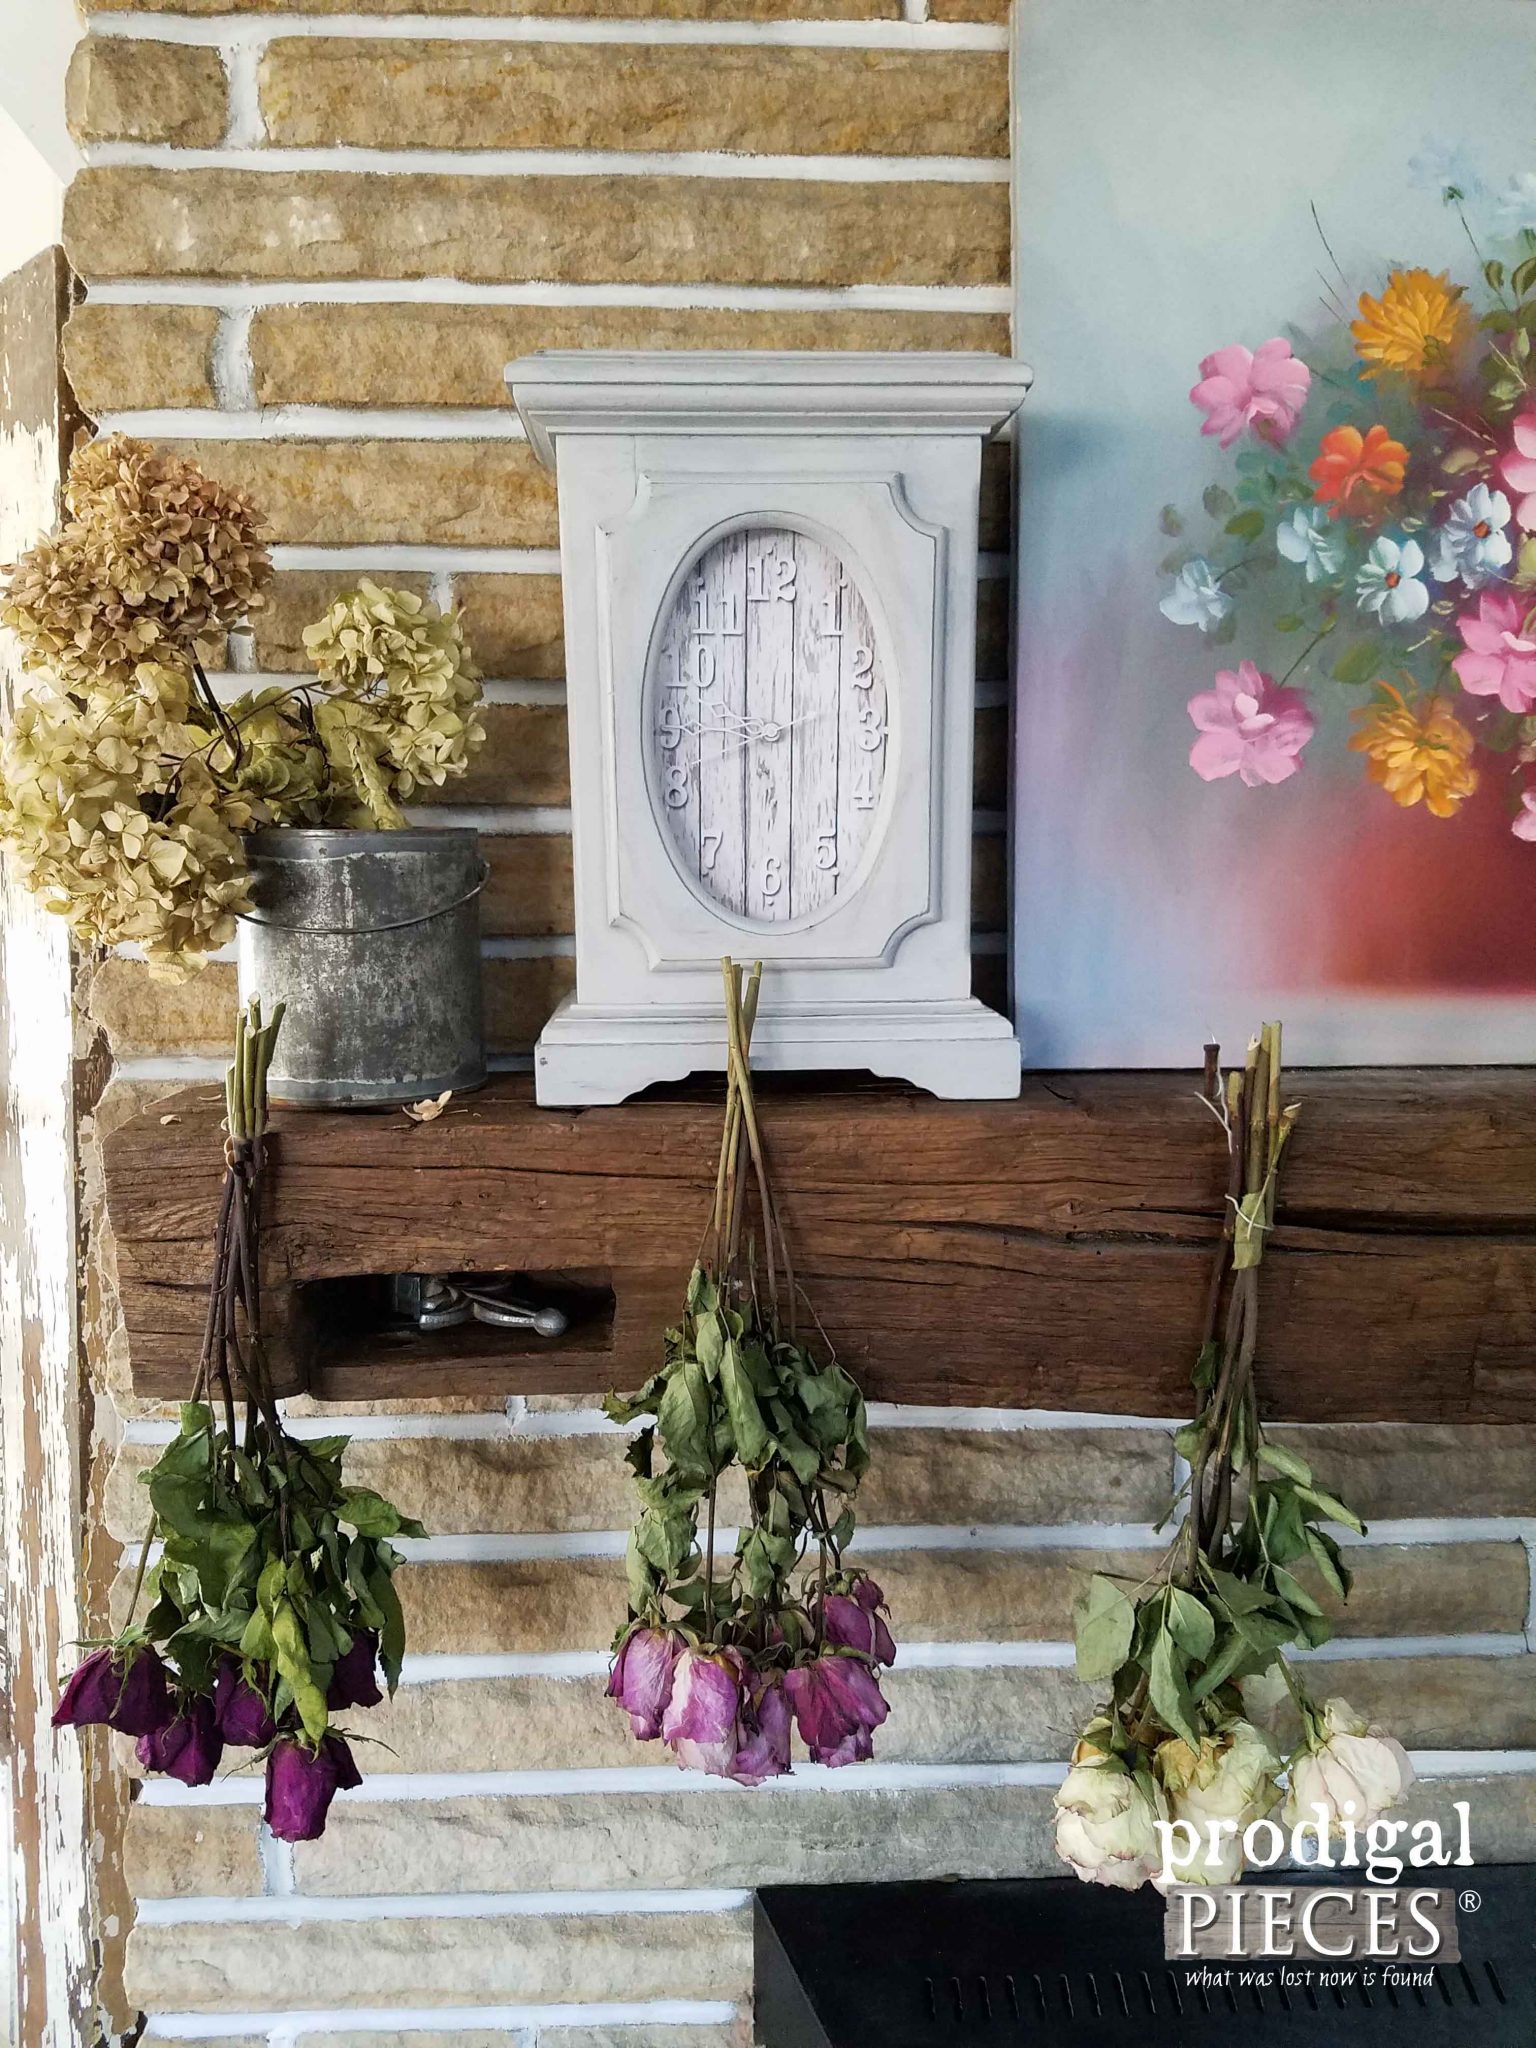 Thrifty Farmhouse Decor Style Mantel Clock from Thrifted Find by Prodigal Pieces | prodigalpieces.com